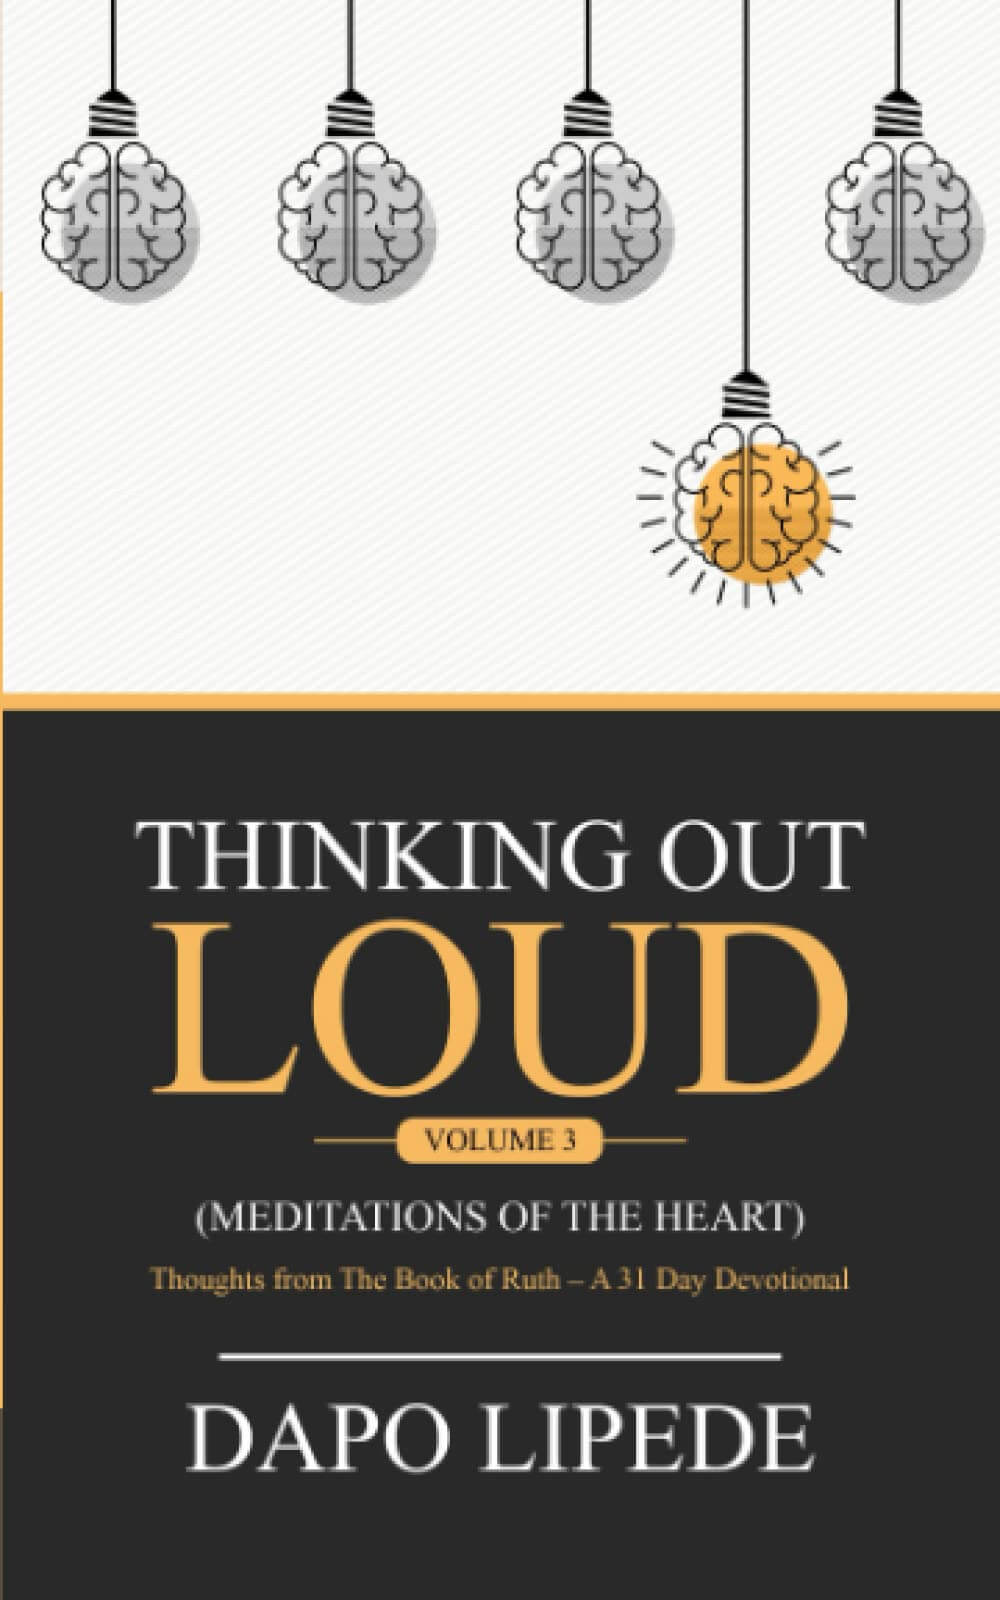 A picture of the book, "Thinking Out Loud".